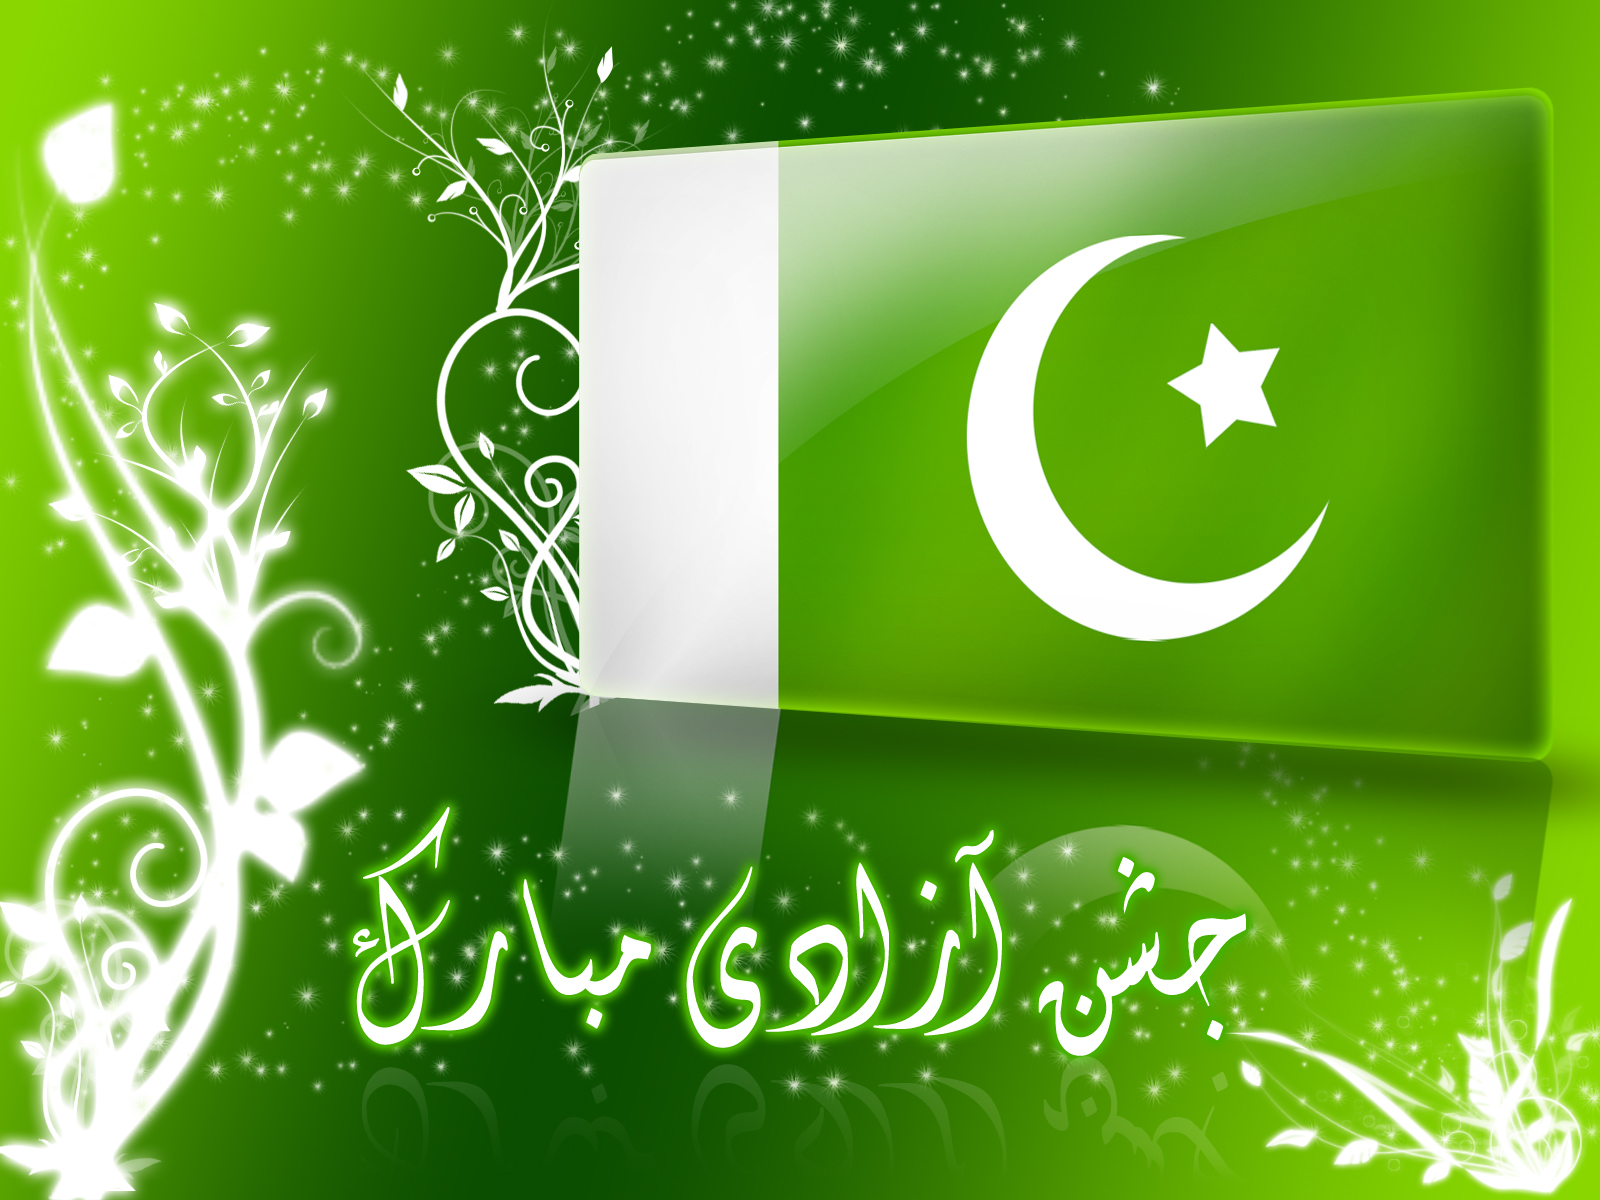 Ever Cool Wallpaper: Happy Independence Day Pakistan Cool Dp and